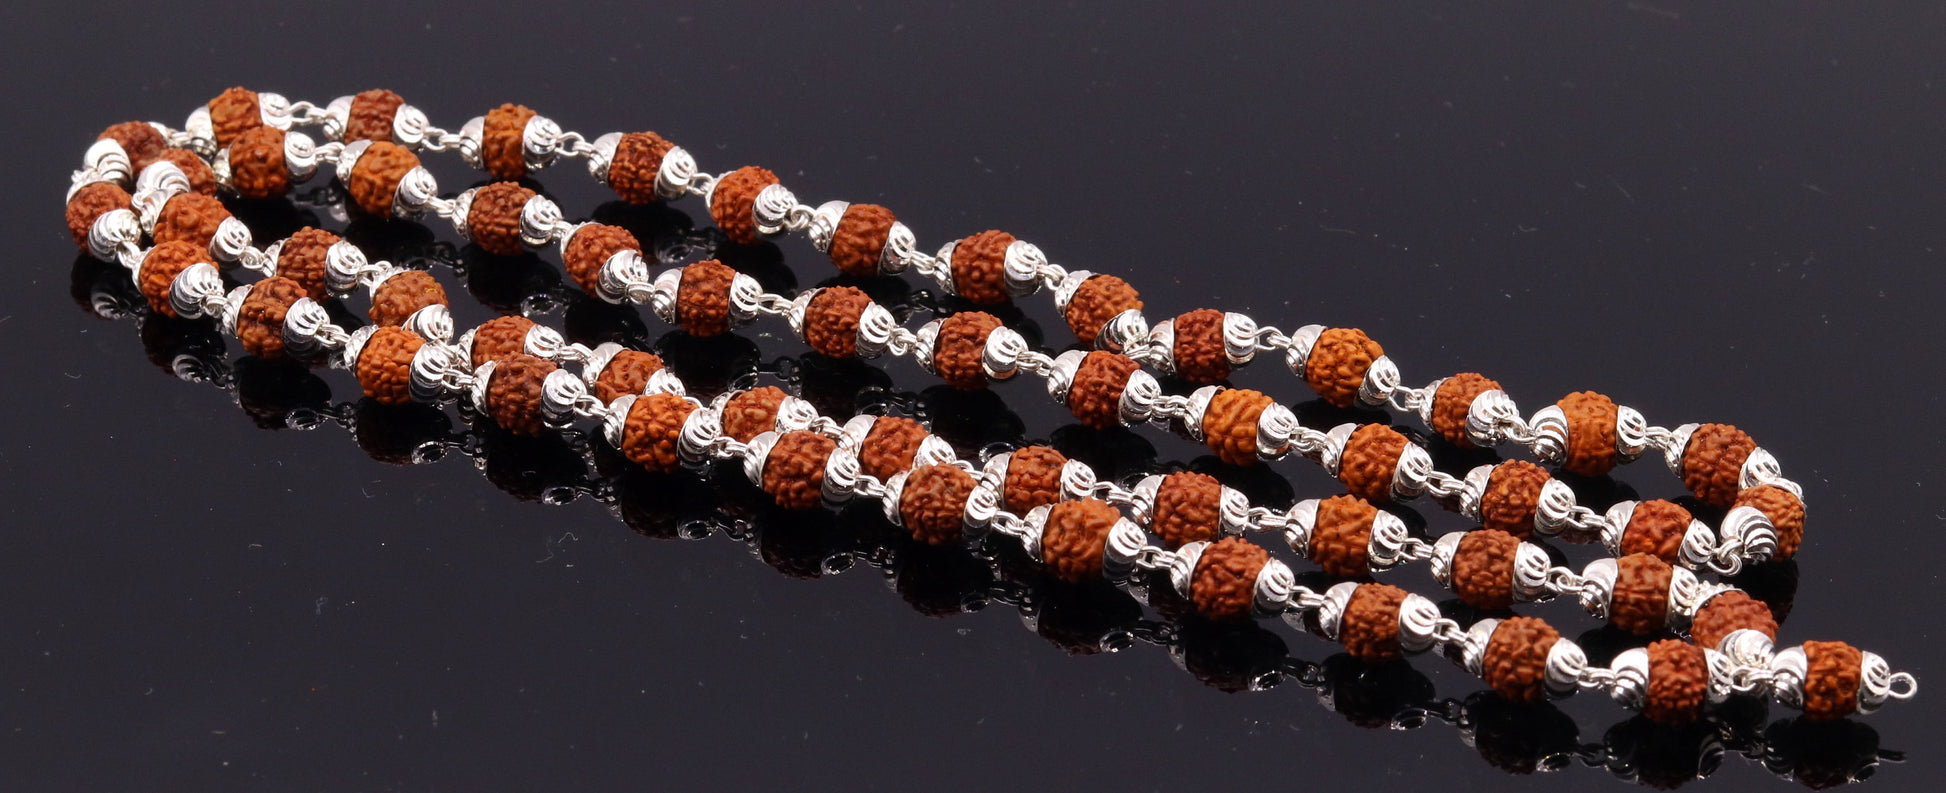 Handmade silver caps natural rudraksha bead chain necklace fabulous unisex silver jewelry awesome design - TRIBAL ORNAMENTS